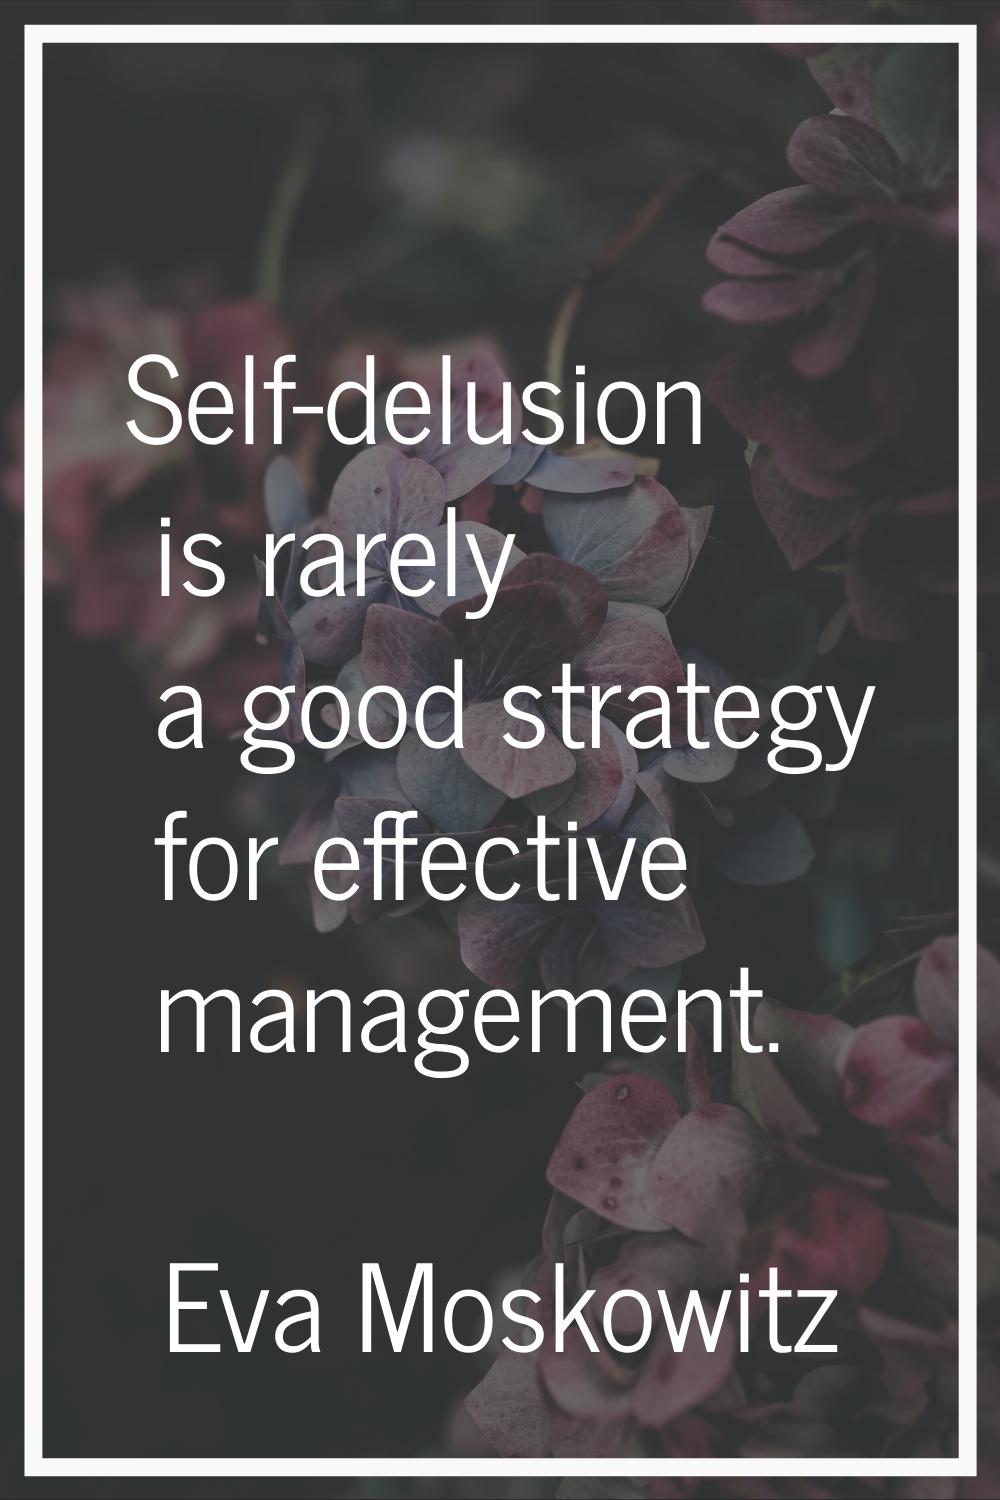 Self-delusion is rarely a good strategy for effective management.